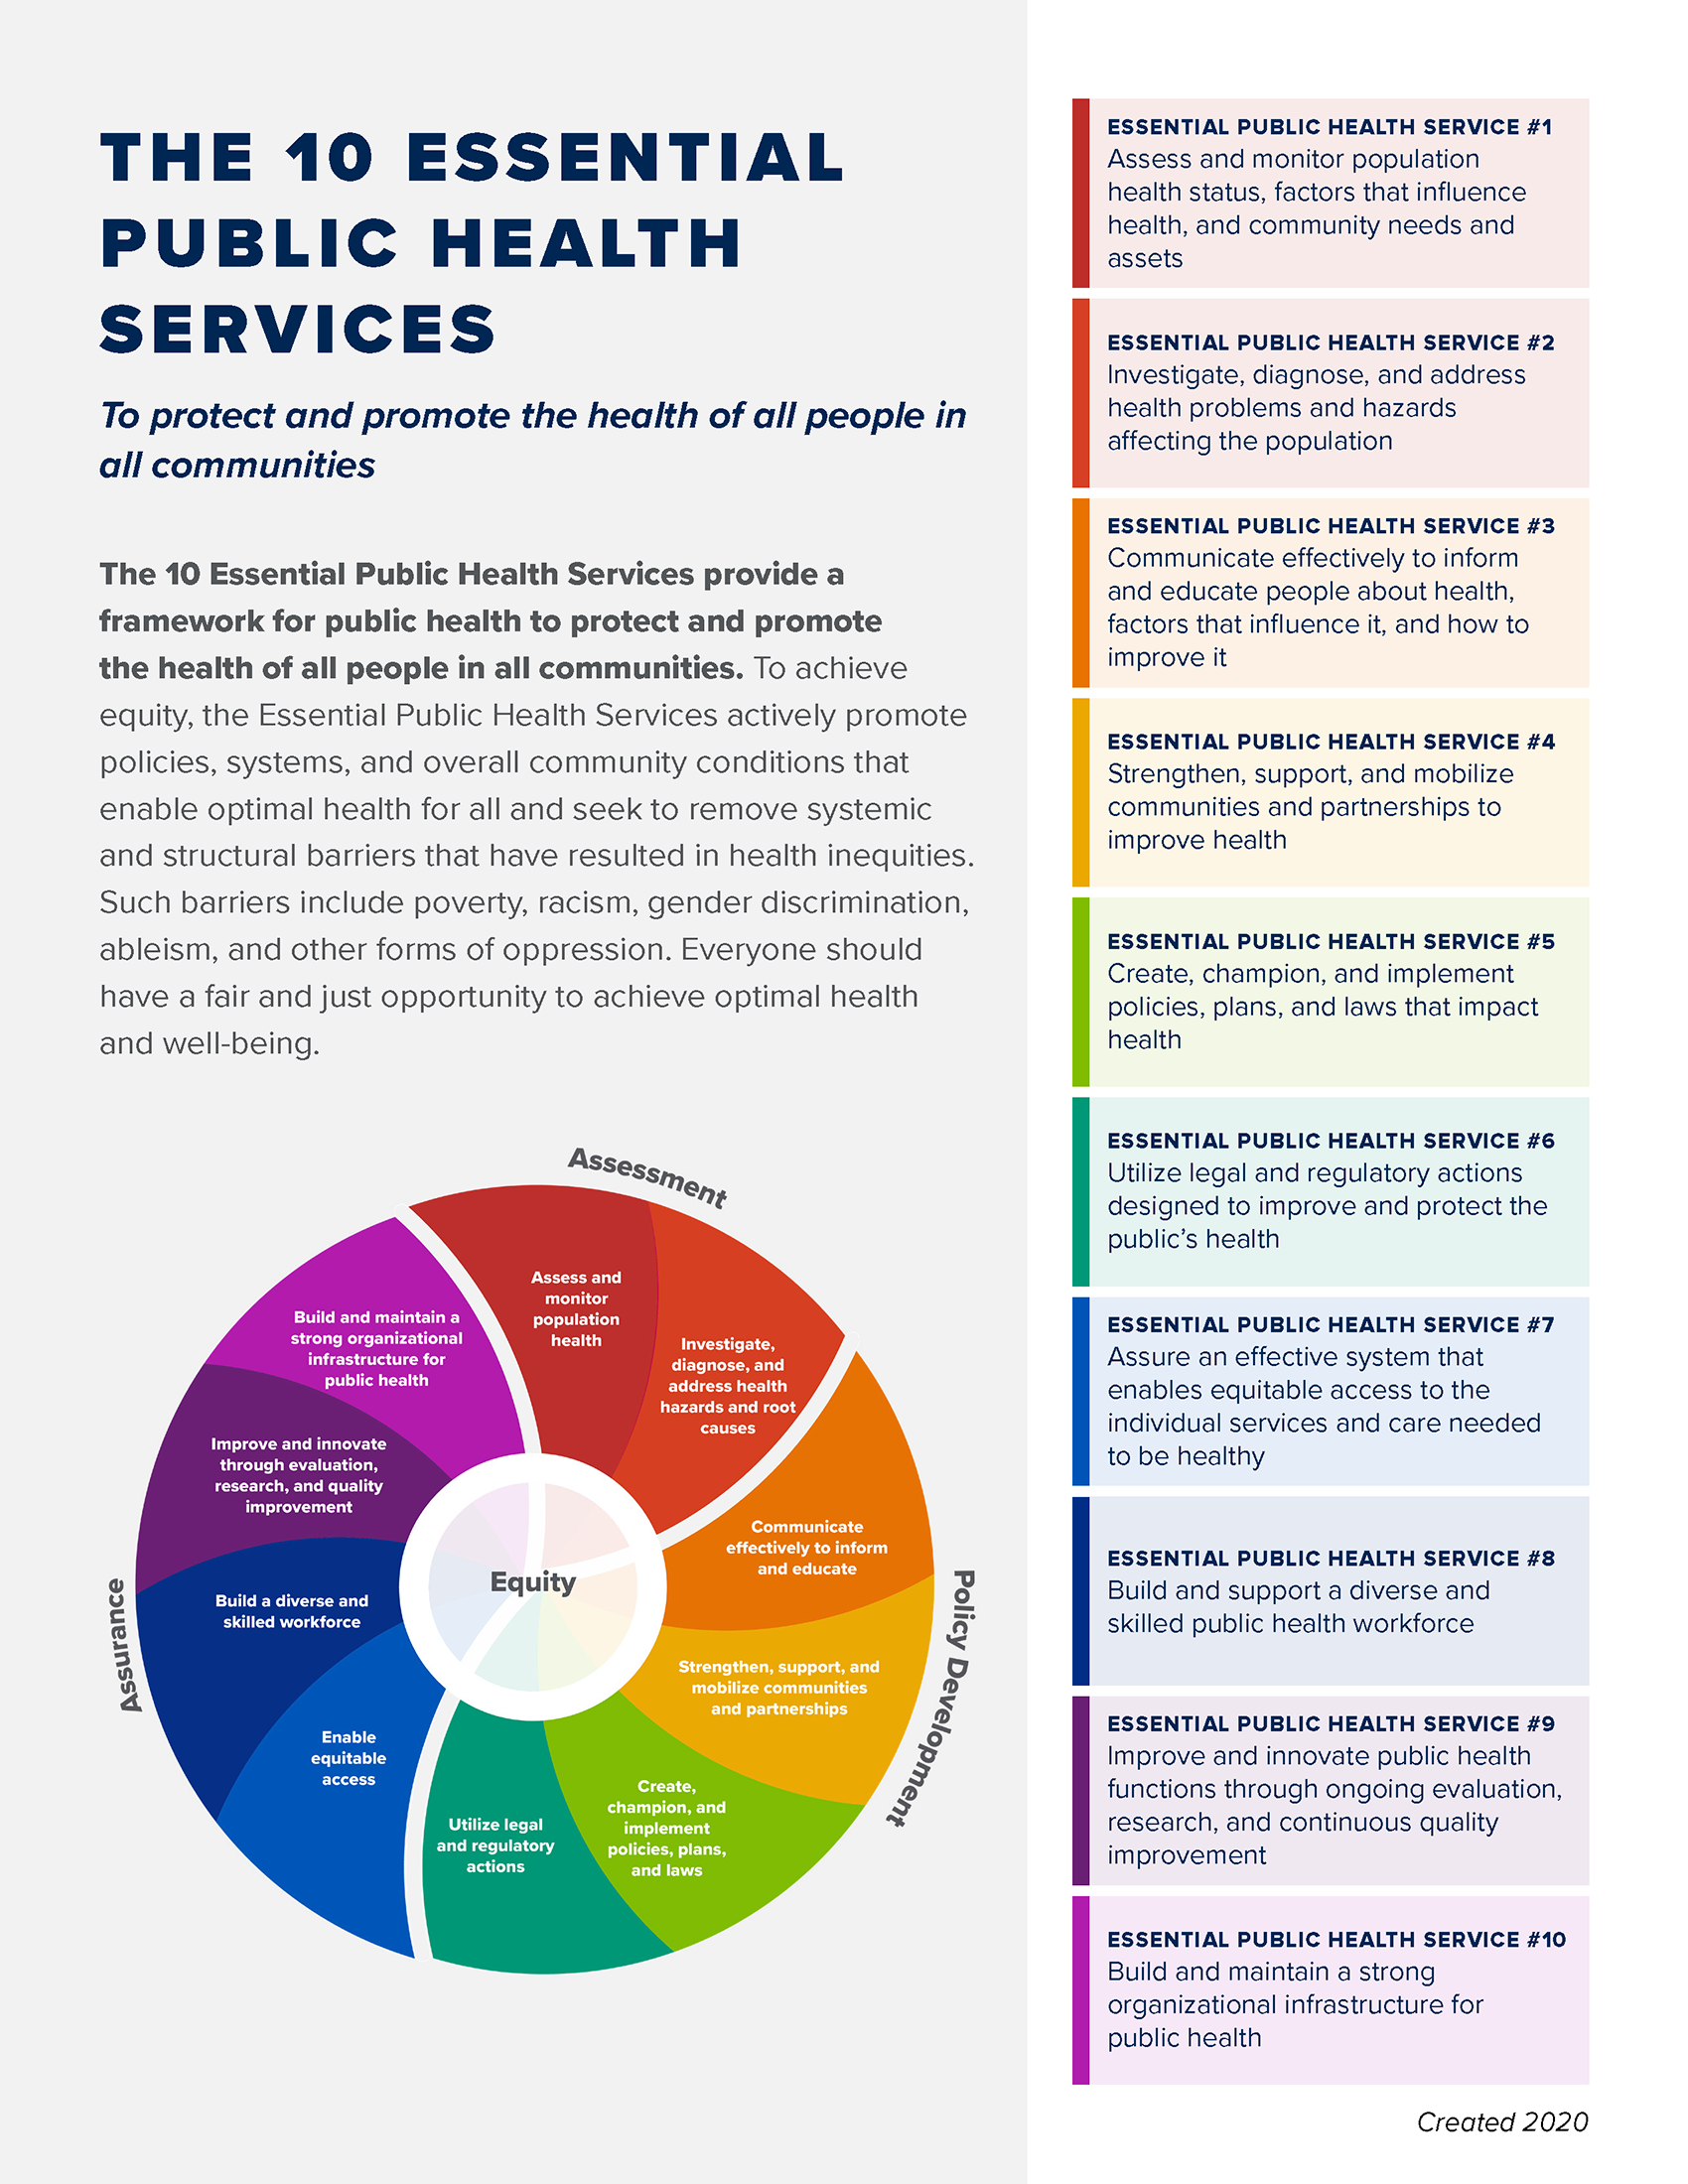 Fact Sheet: The 10 Essential Public Health Services